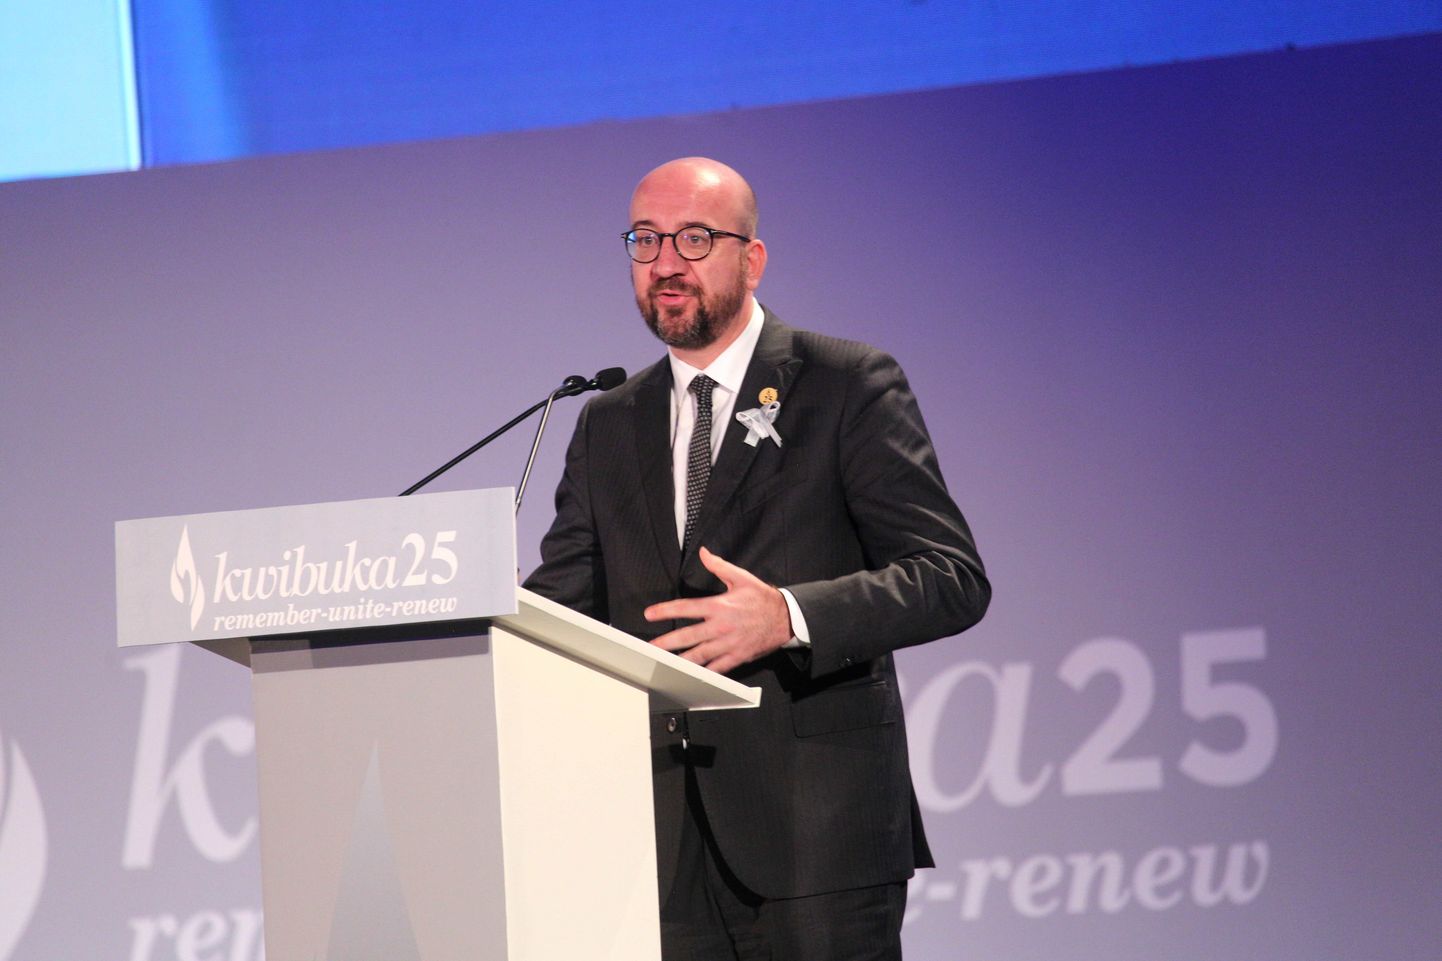 Belgia peaminister Charles Michel